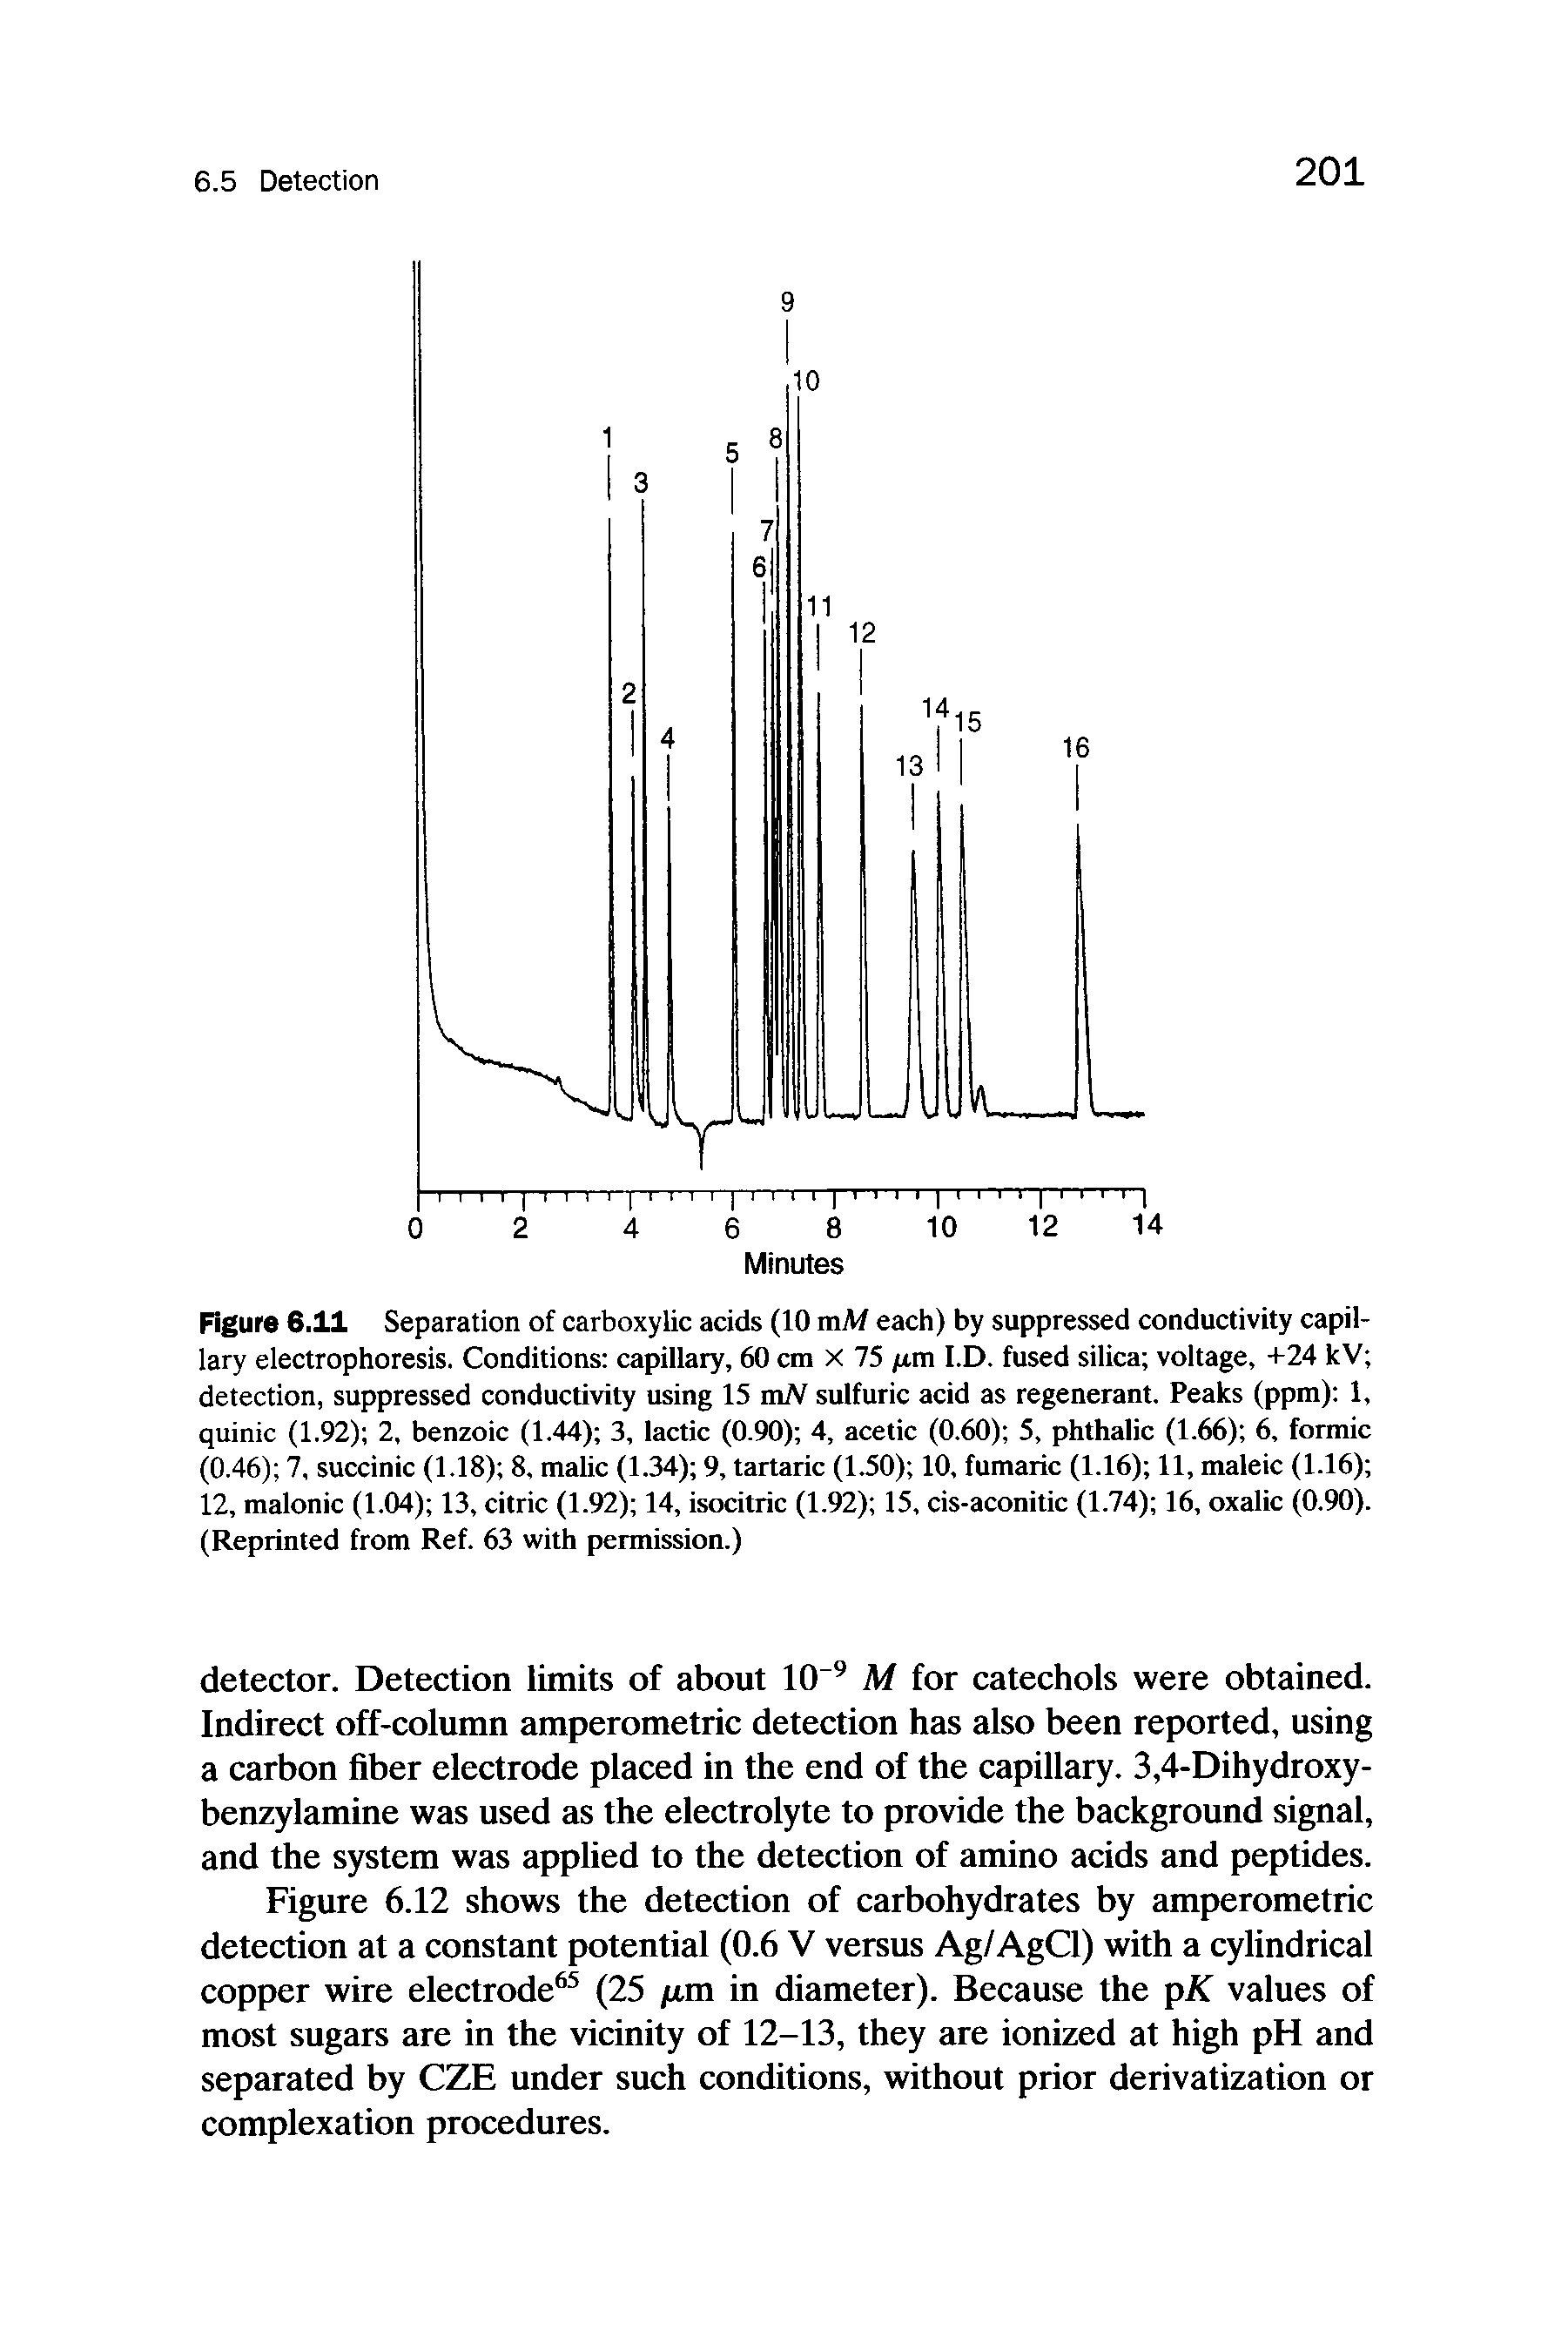 Figure 6.11 Separation of carboxylic acids (10 mJW each) by suppressed conductivity capillary electrophoresis. Conditions capillary, 60 cm X 75 jum I.D. fused silica voltage, +24 kV detection, suppressed conductivity using 15 mJV sulfuric acid as regenerant. Peaks (ppm) 1, quinic (1.92) 2, benzoic (1.44) 3, lactic (0.90) 4, acetic (0.60) 5, phthalic (1.66) 6, formic (0.46) 7, succinic (1.18) 8, malic (1.34) 9, tartaric (1.50) 10, fumaric (1.16) 11, maleic (1.16) 12, malonic (1.04) 13, citric (1.92) 14, isocitric (1.92) 15, cis-aconitic (1.74) 16, oxalic (0.90). (Reprinted from Ref. 63 with permission.)...